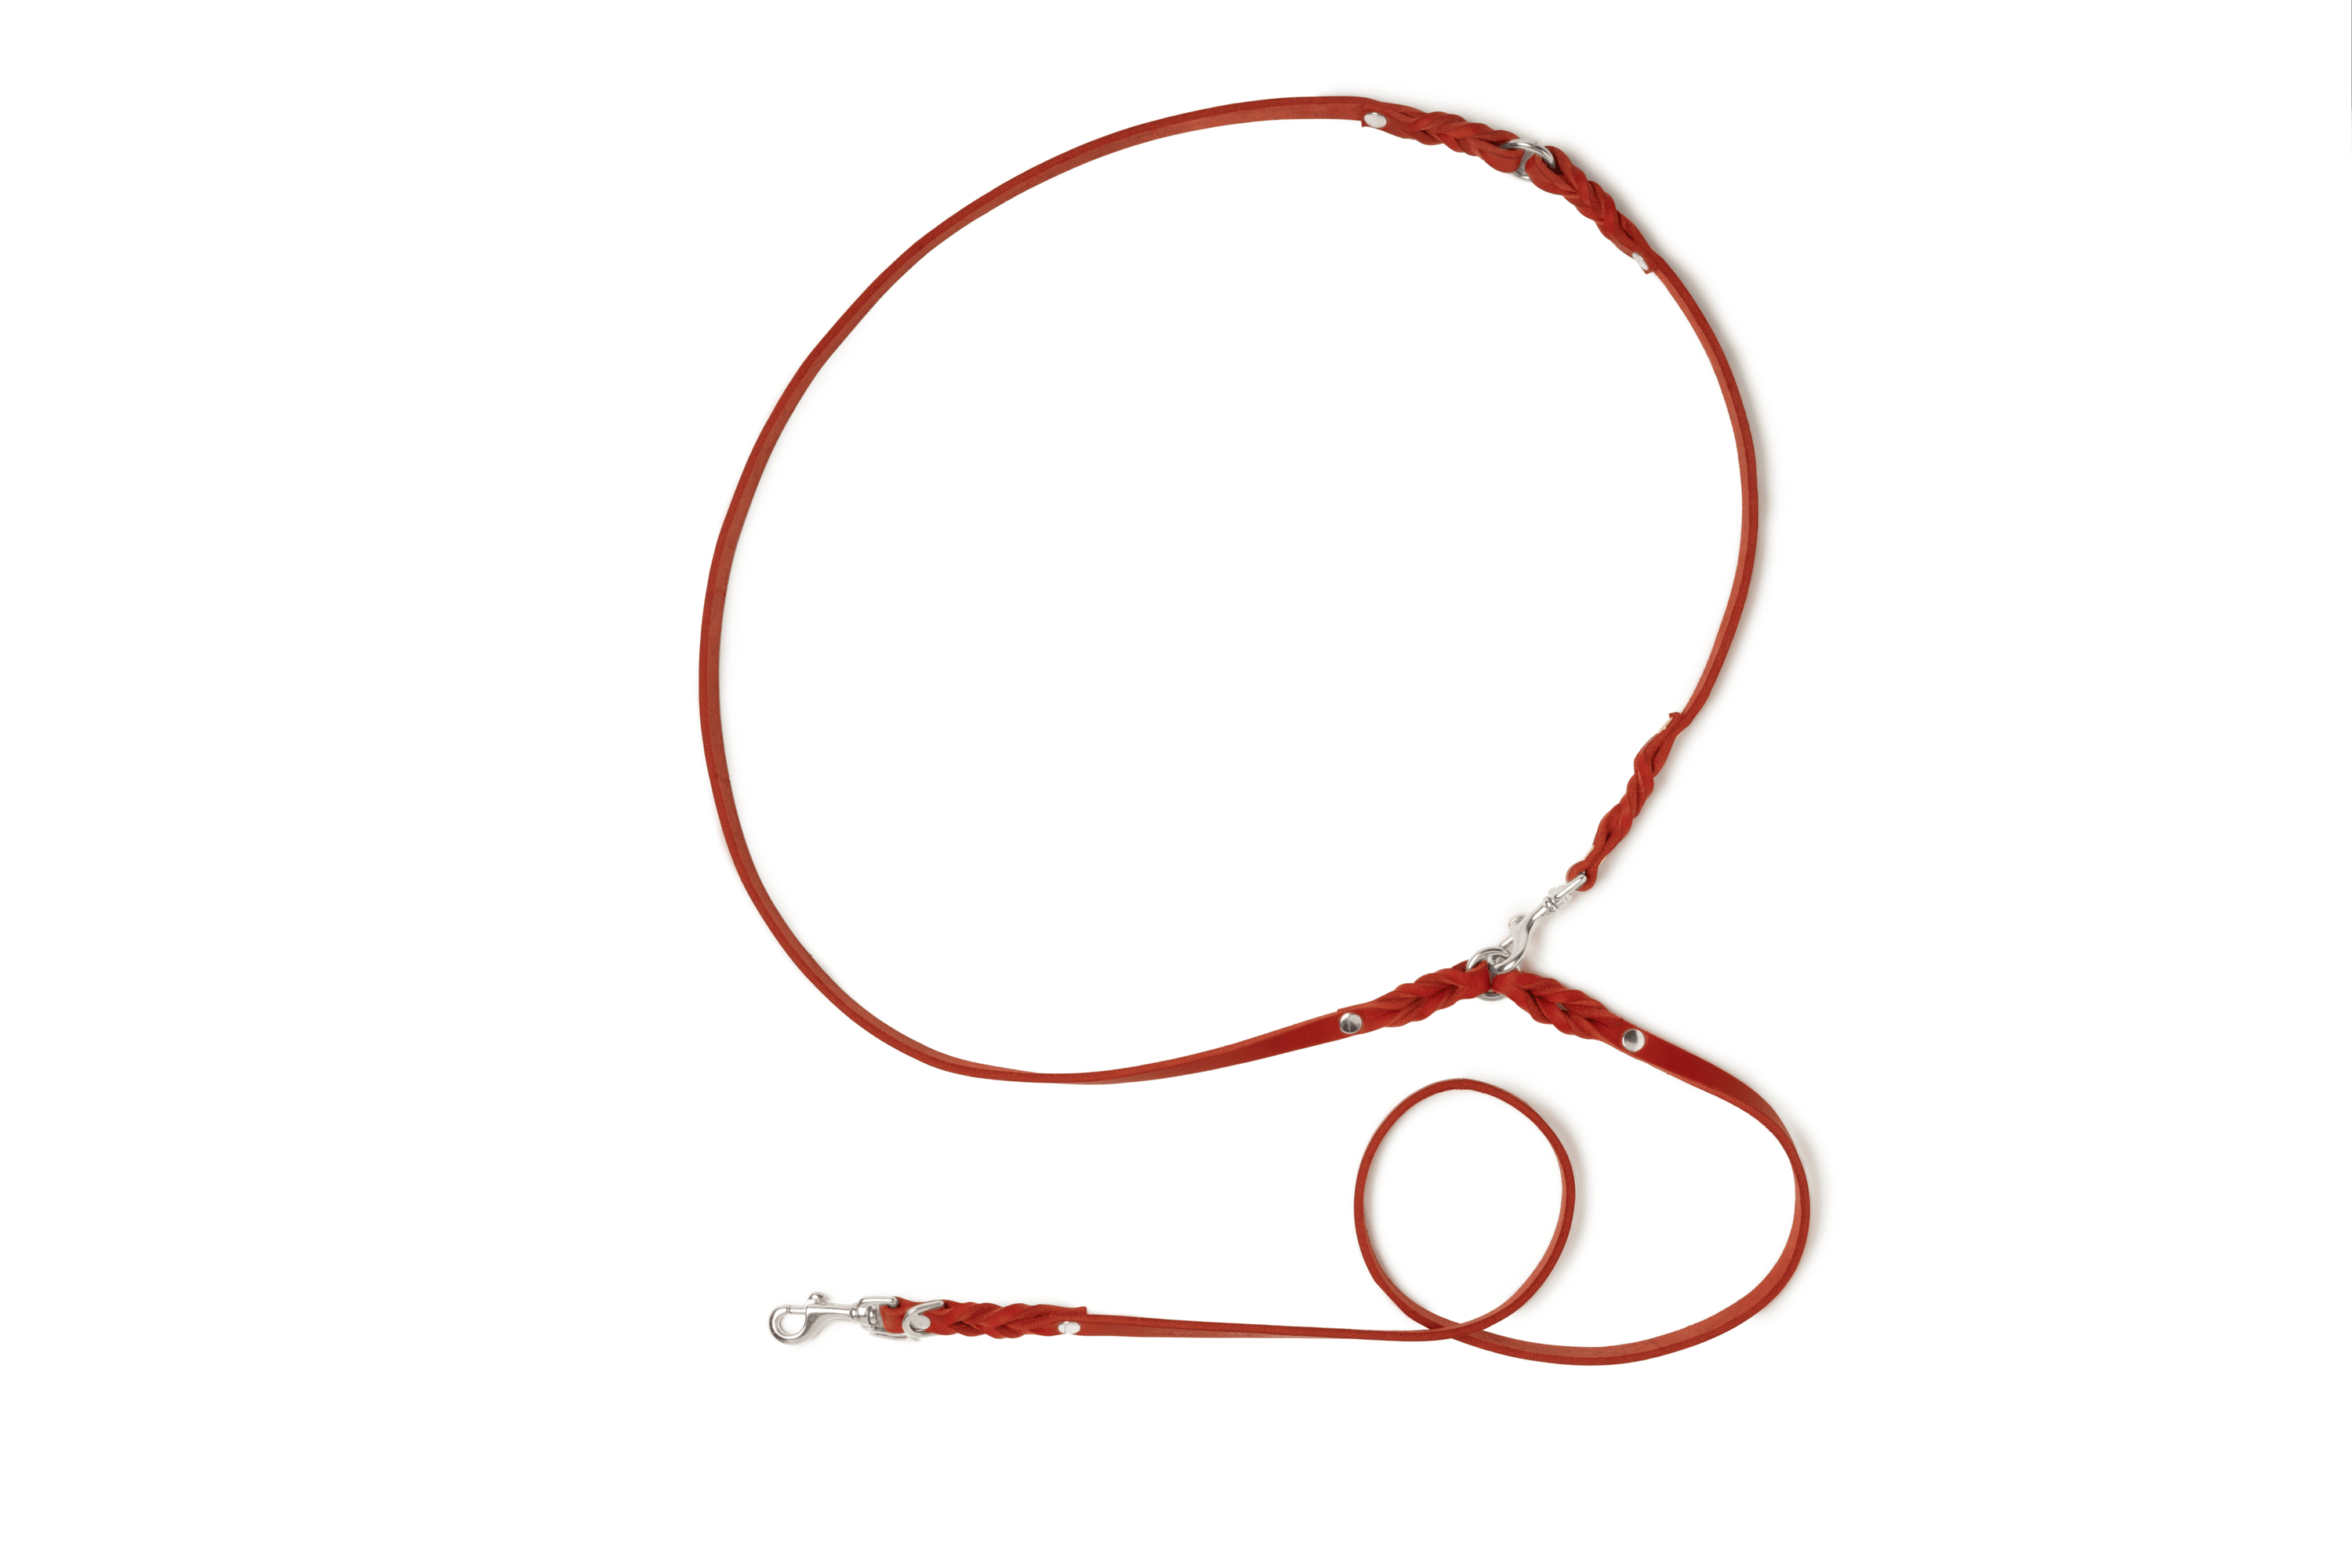 Butter Leather 3x Adjustable Dog Leash - Sahara Cognac – Molly and Stitch  GmbH